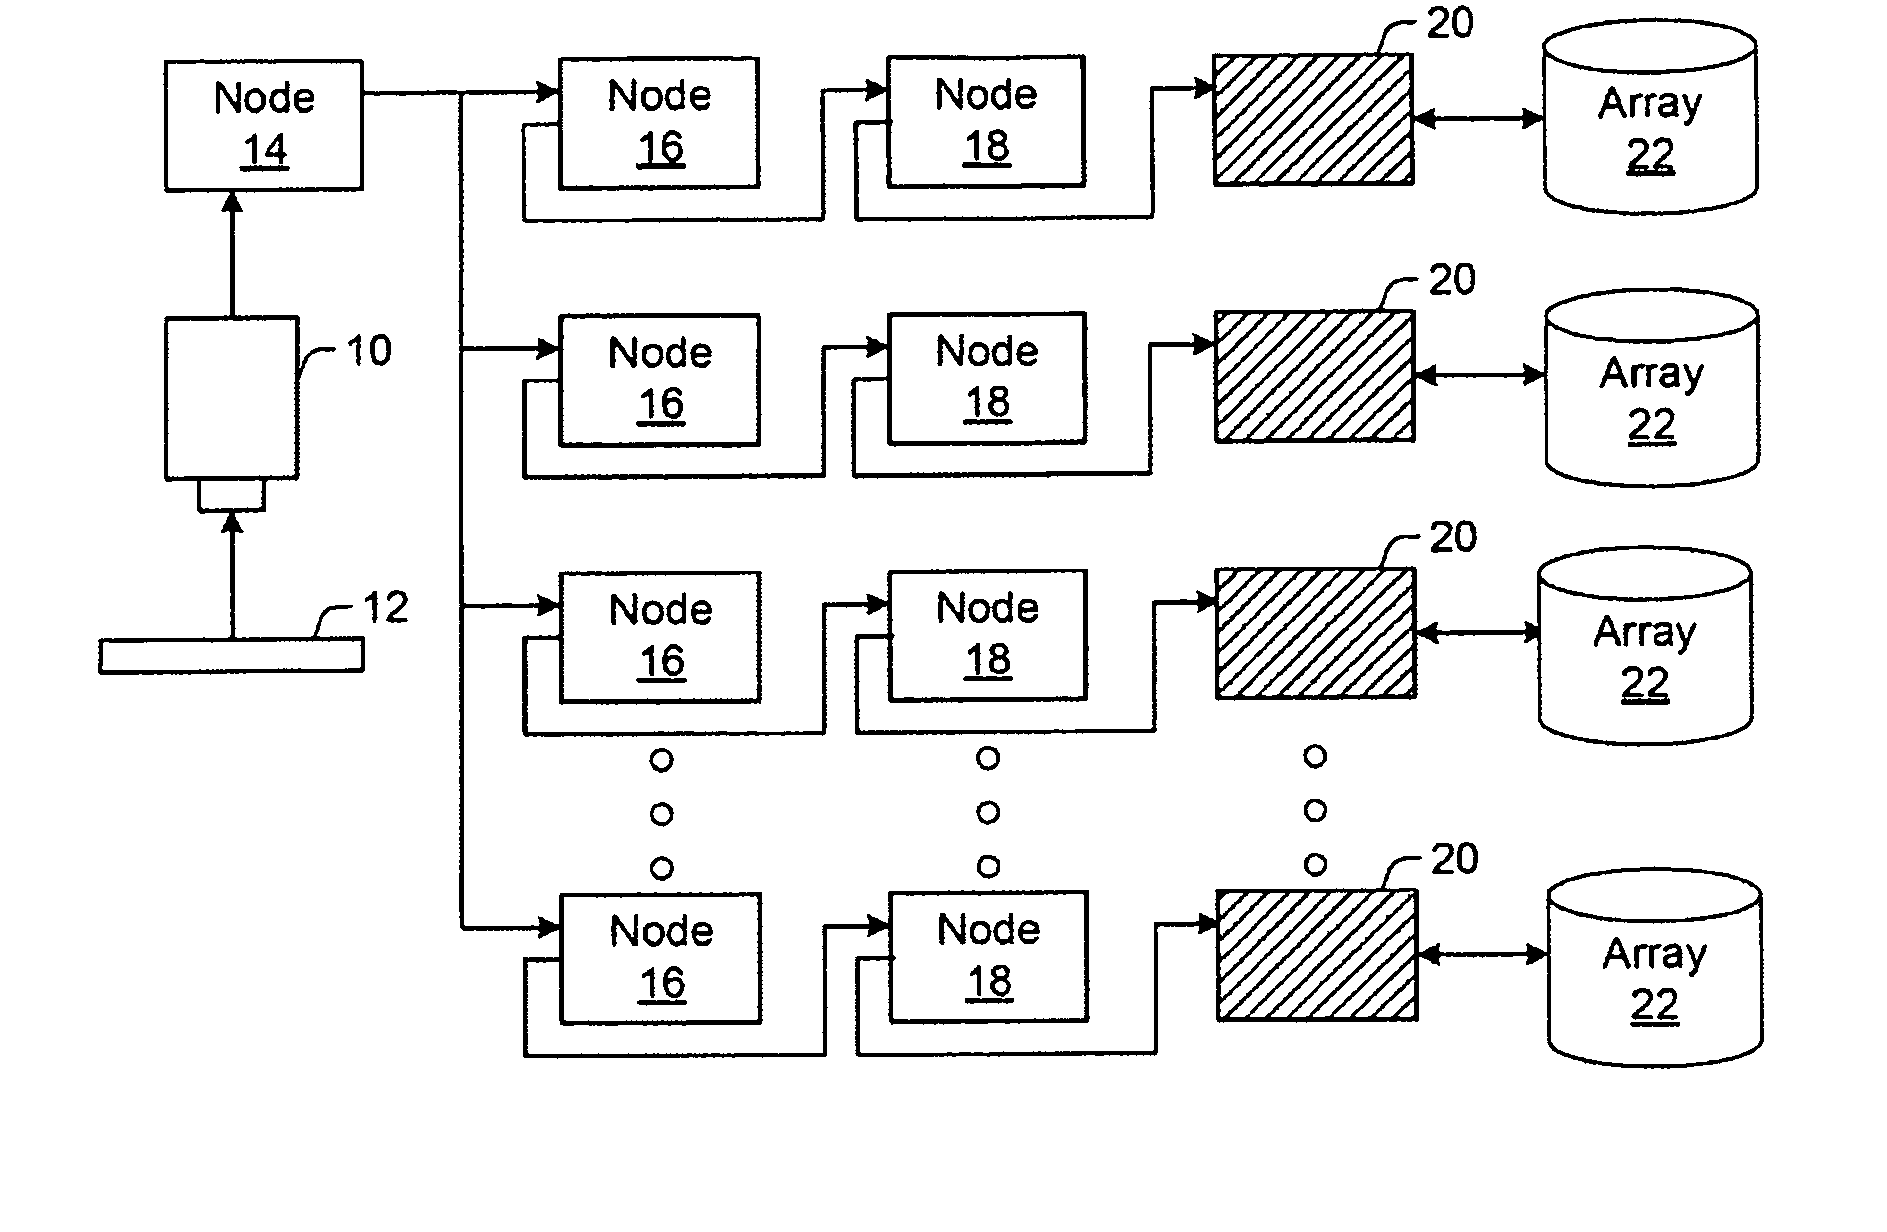 Systems and methods for creating persistent data for a wafer and for using persistent data for inspection-related functions